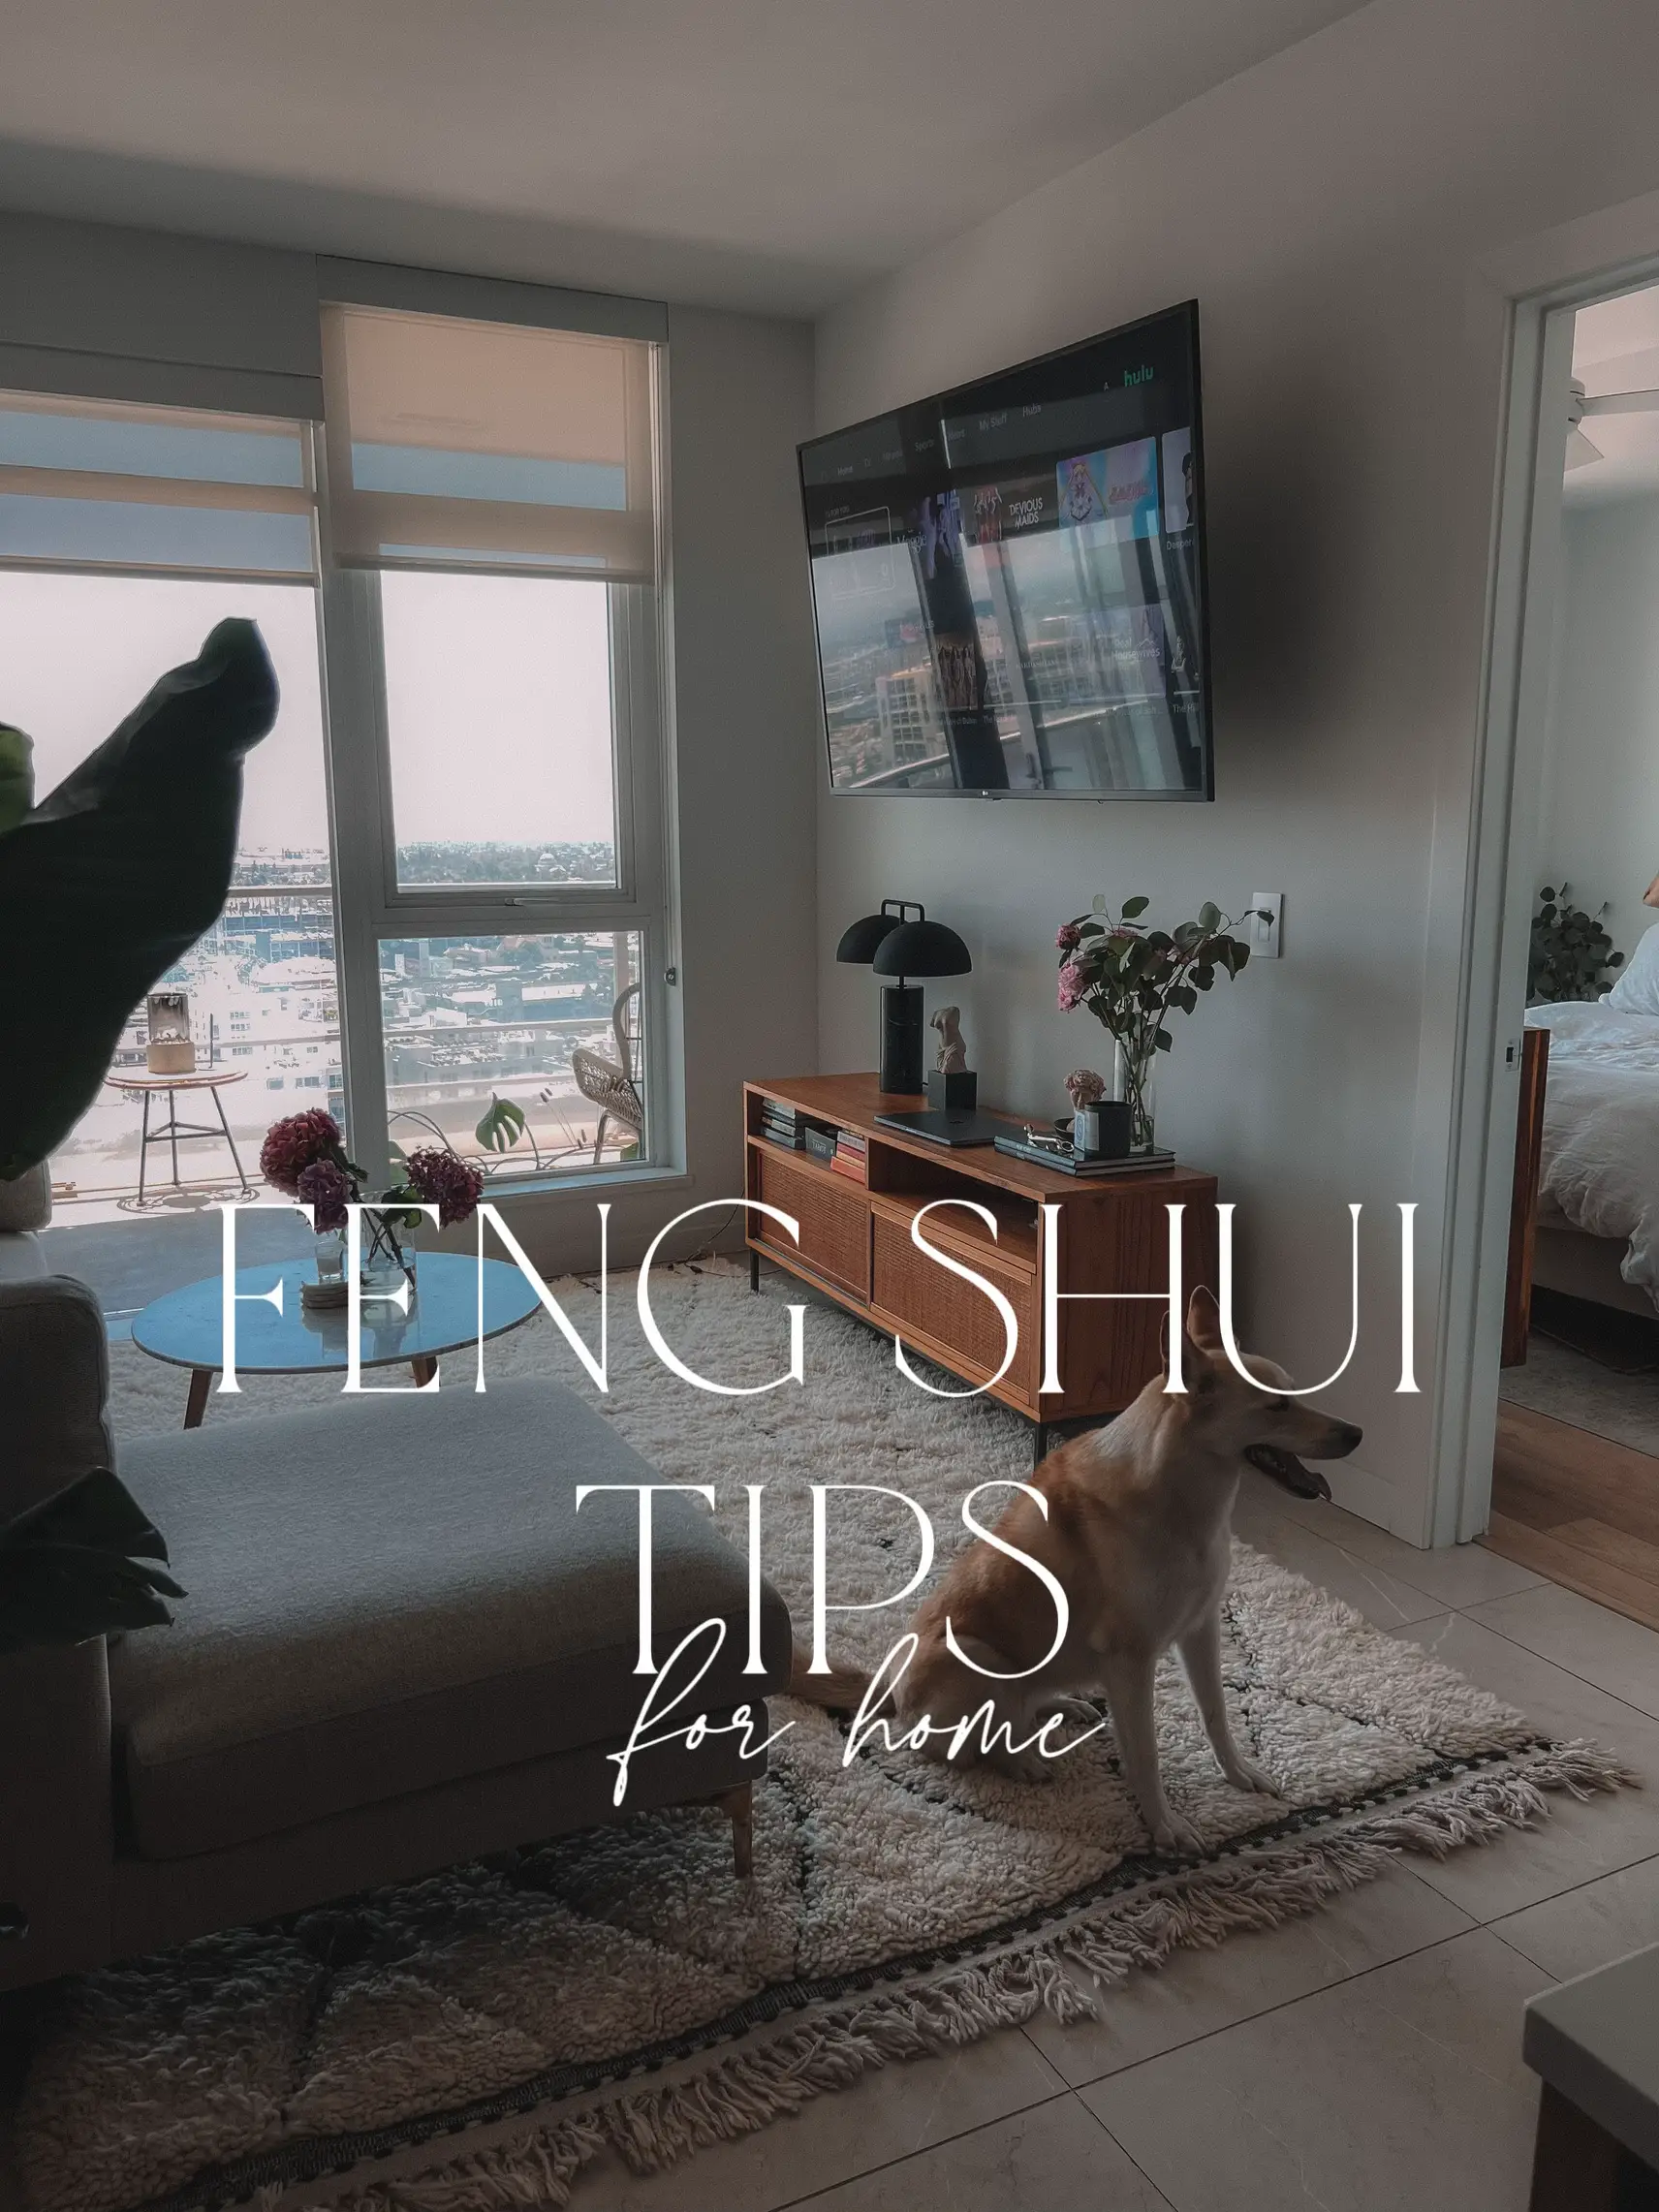 Feng shui guides room placement to avoid negativity, Life + Entertainment